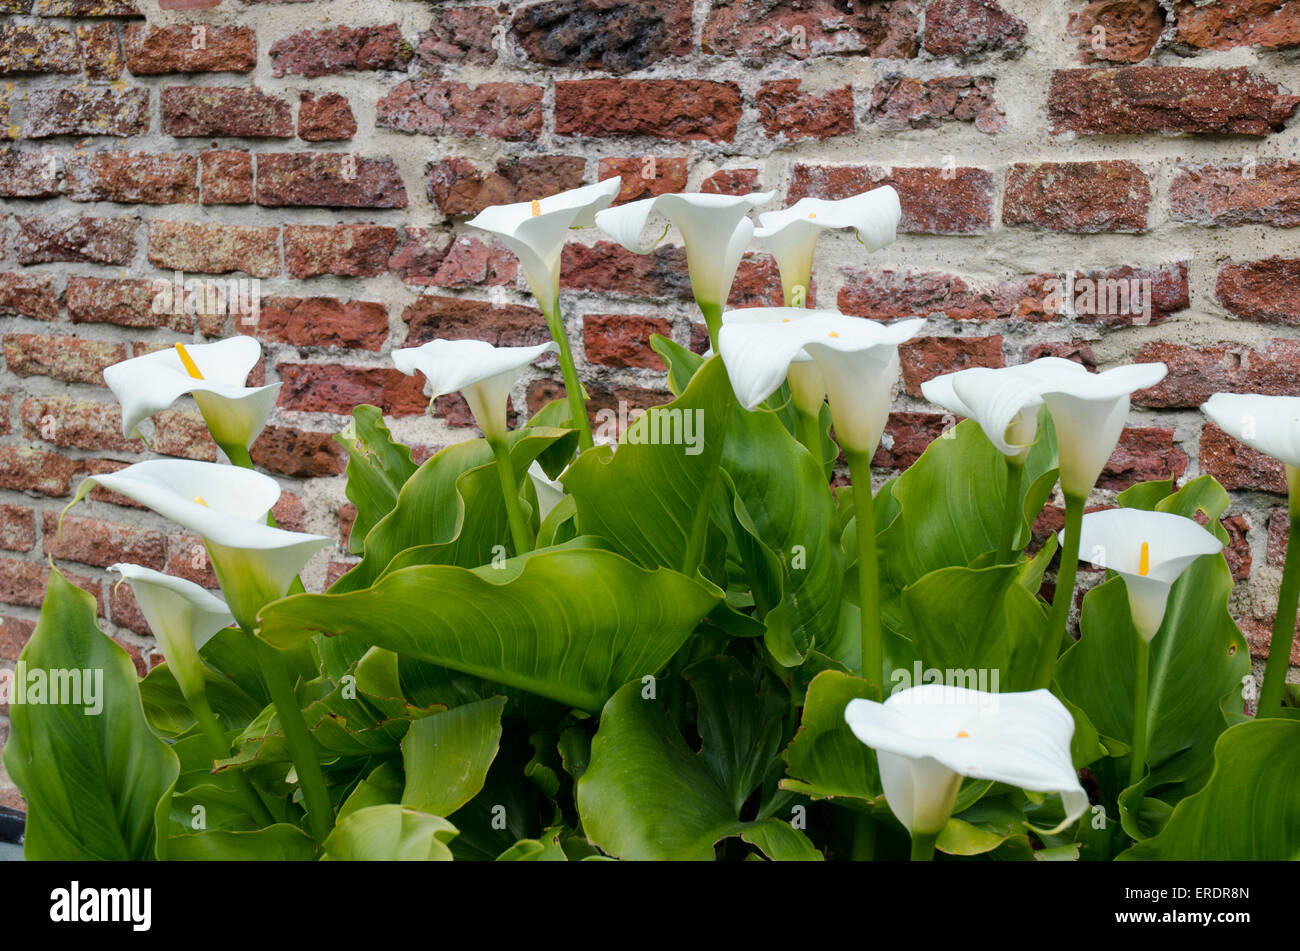 Spathiphyllum Peace Lily plants in the family Araceae, Stock Photo